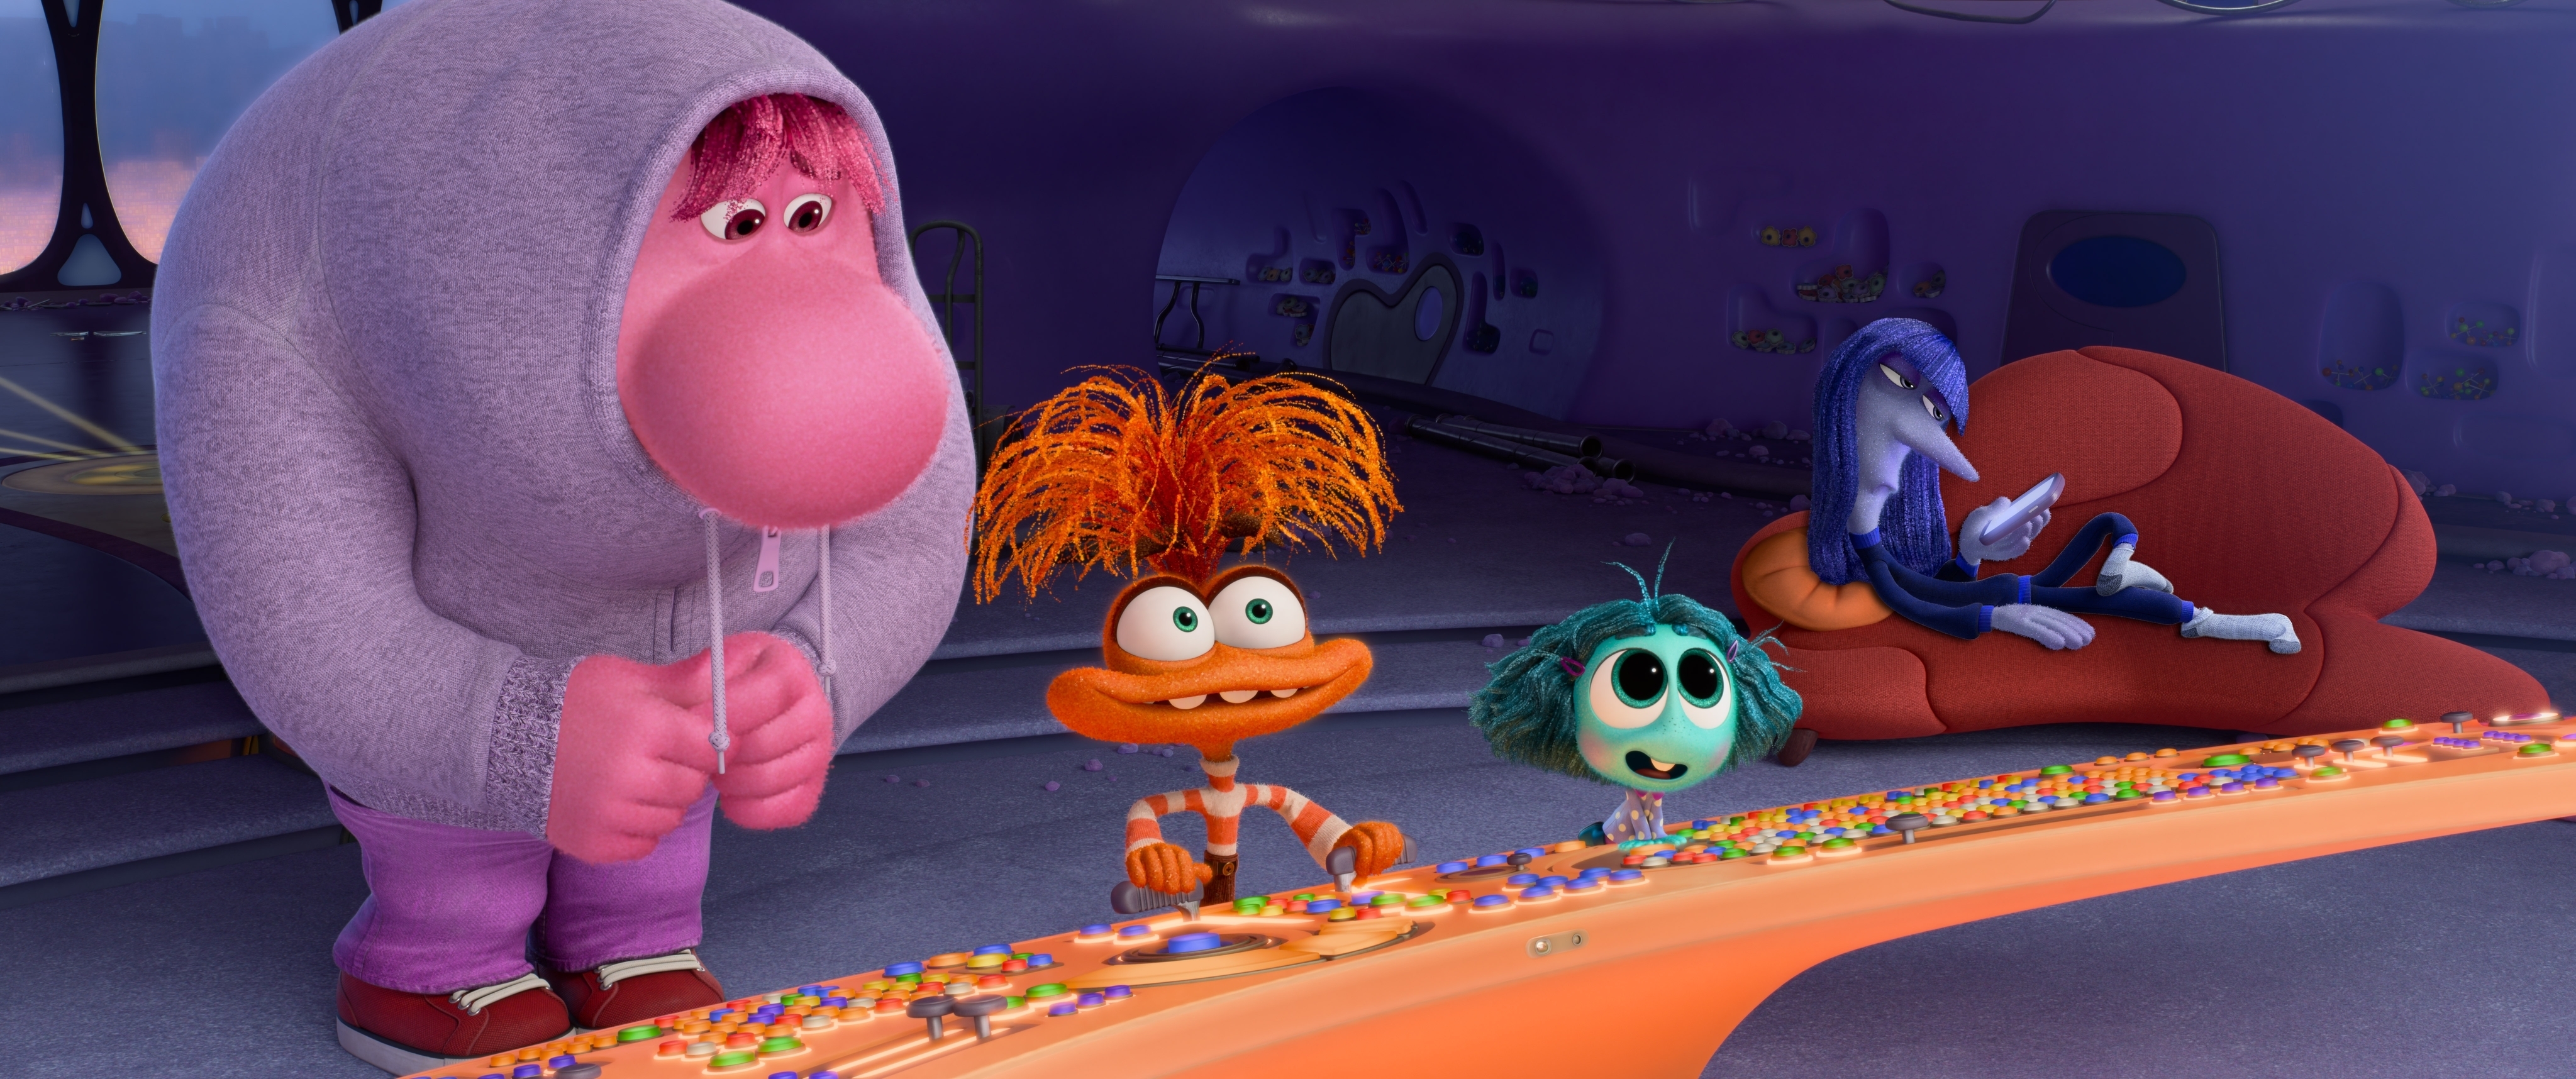 New ‘Inside Out 2’ Footage Teases Different Animation Styles